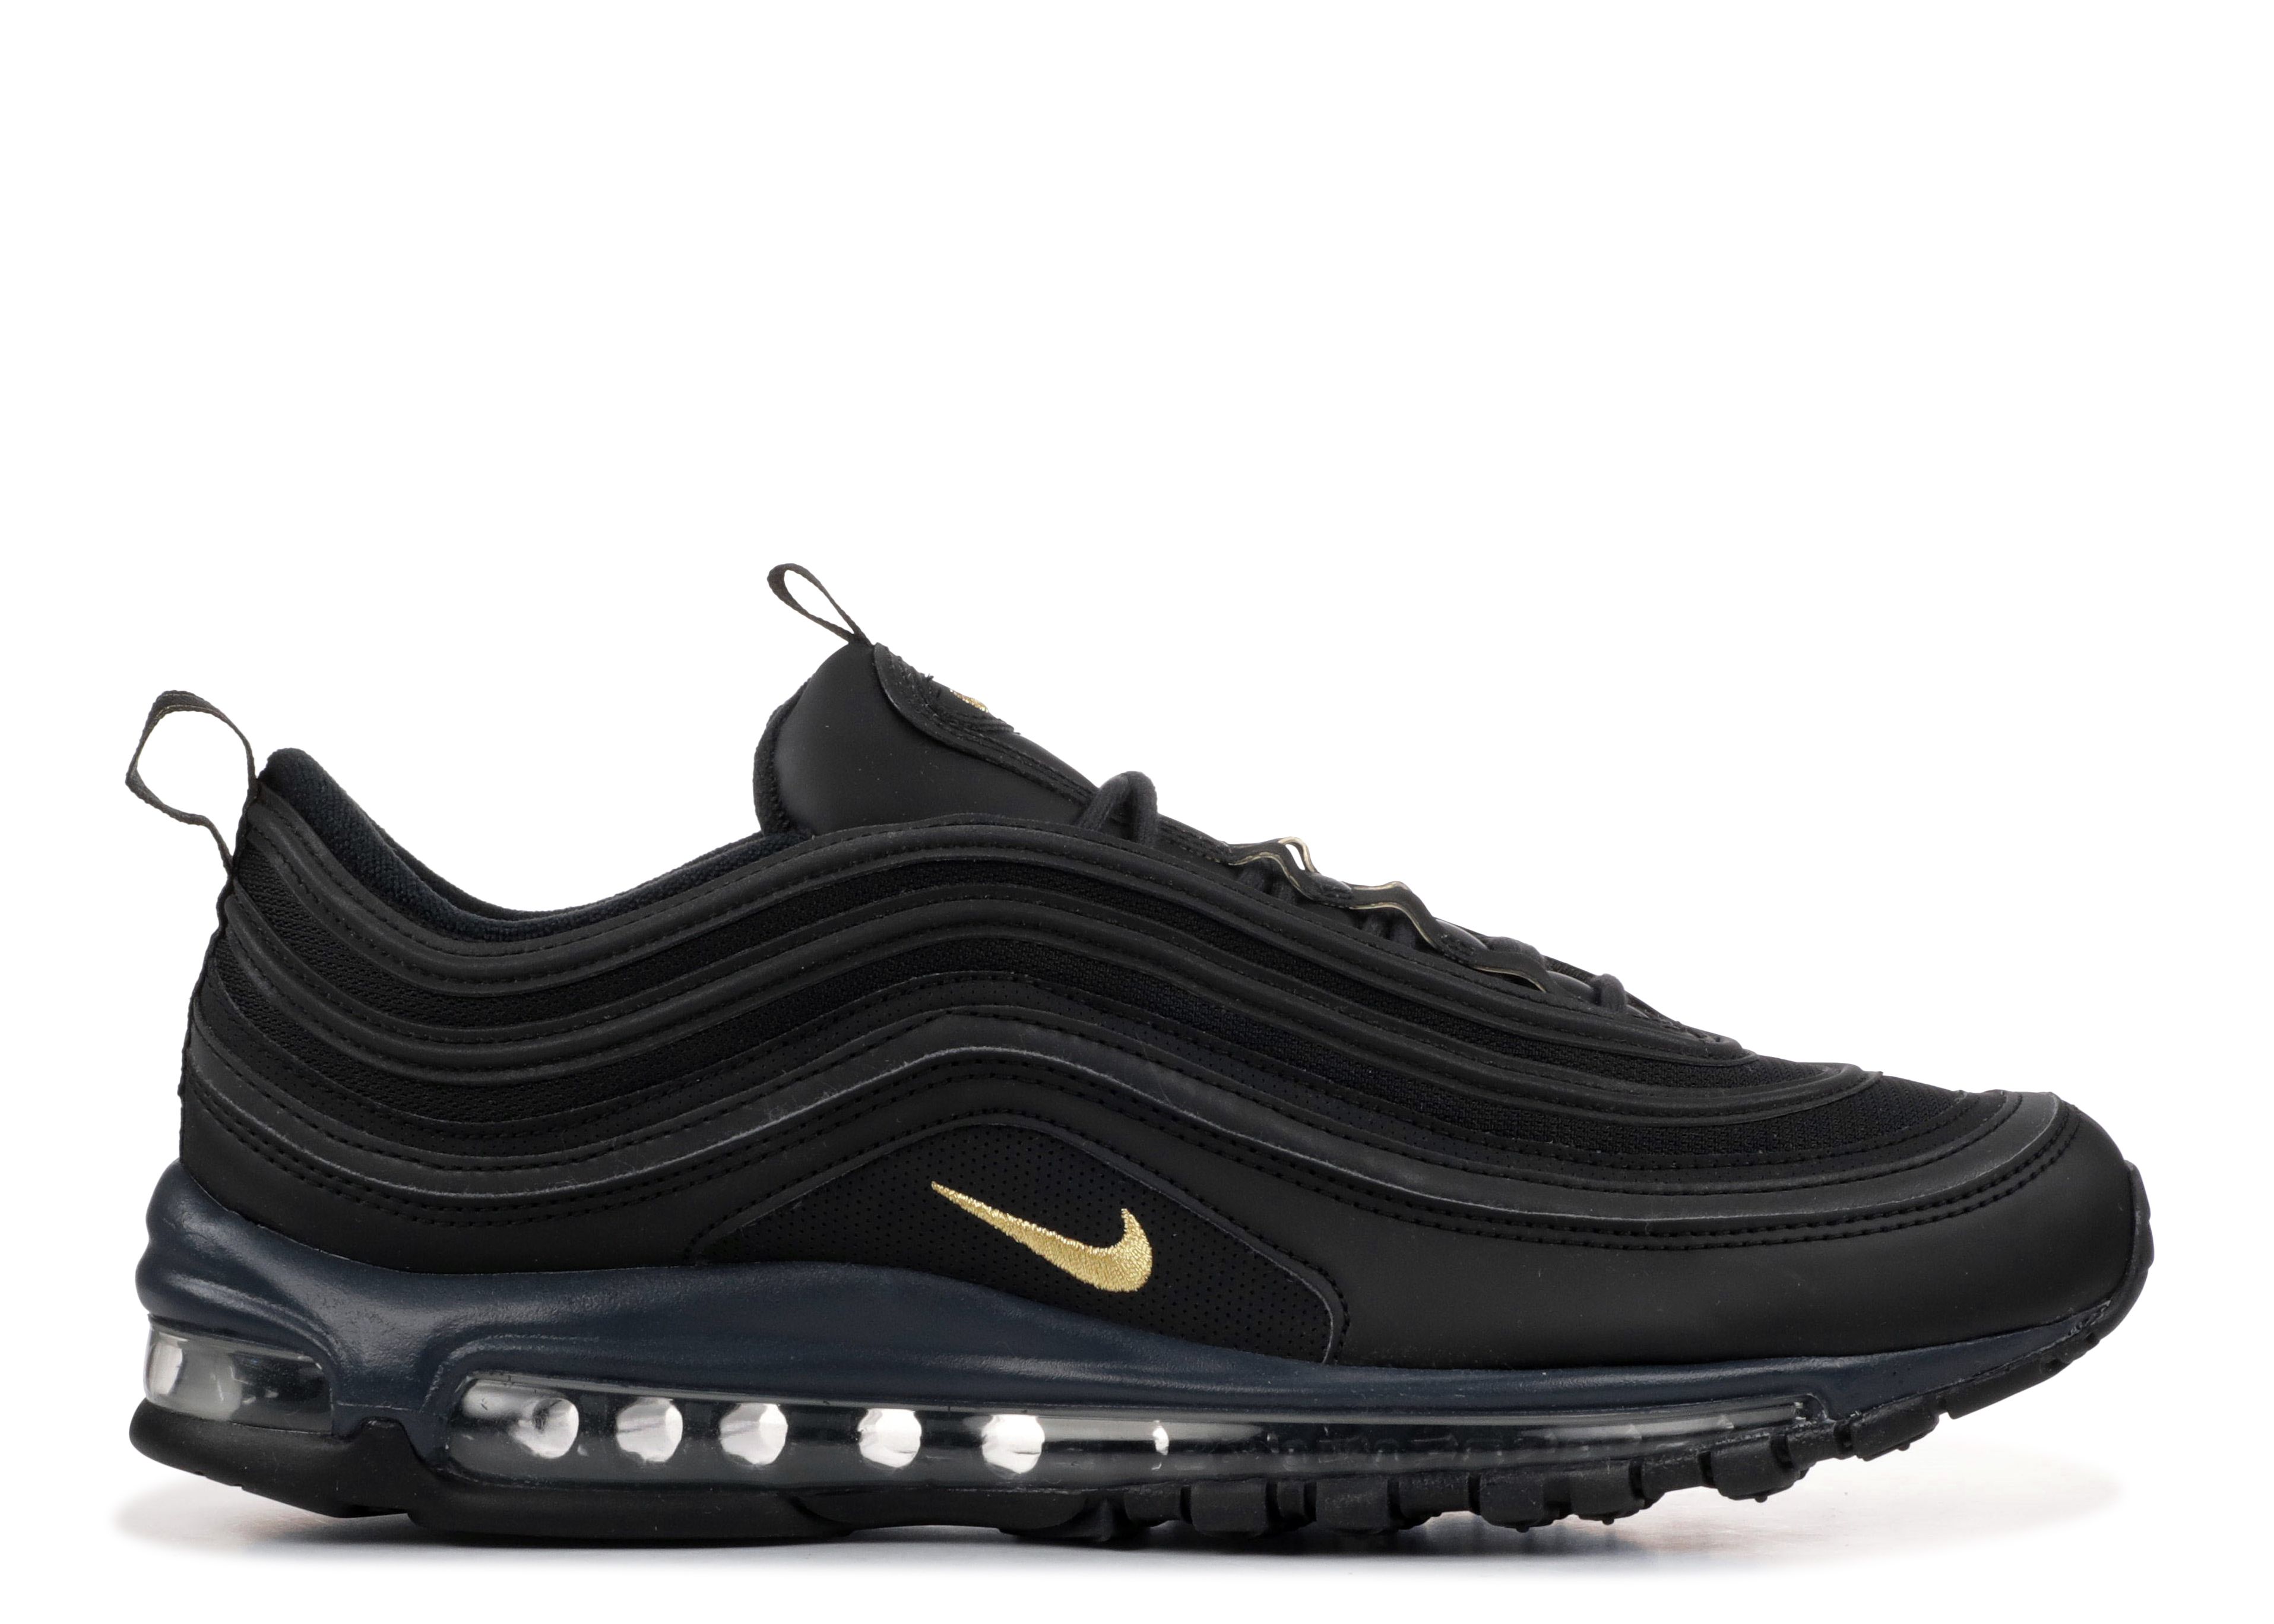 Nike Air Max 97 Black (Reflective) Perfect Condition Selling